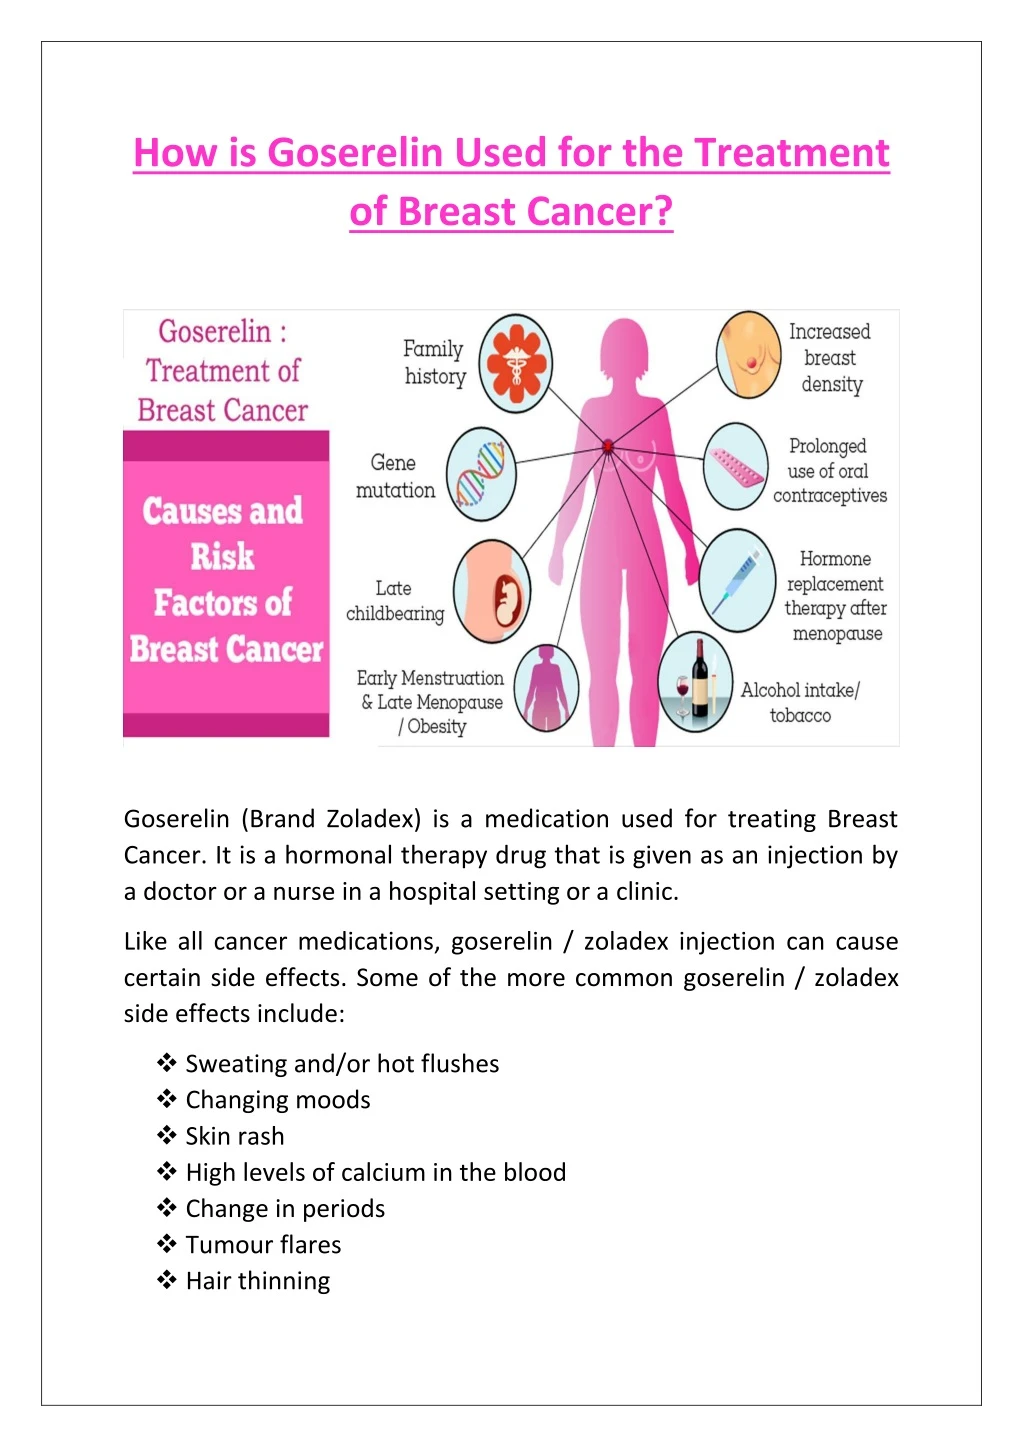 how is goserelin used for the treatment of breast